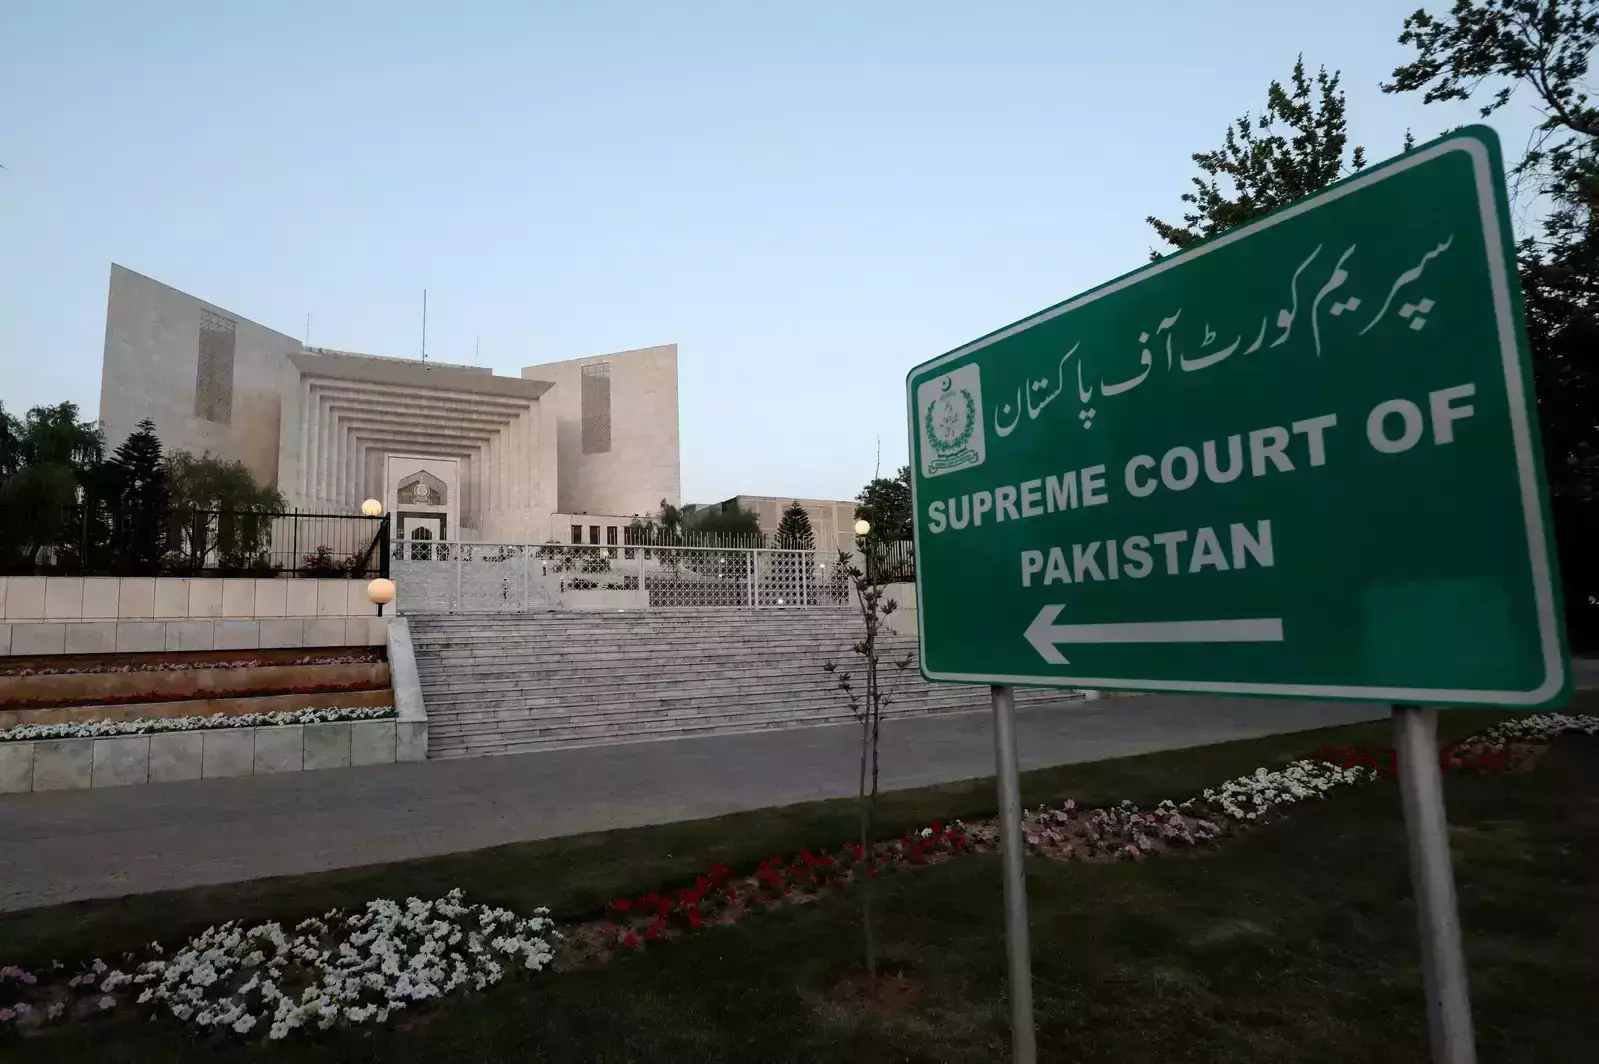 Election funds: Pakistans Supreme Court asks top officials to appear before it on April 14